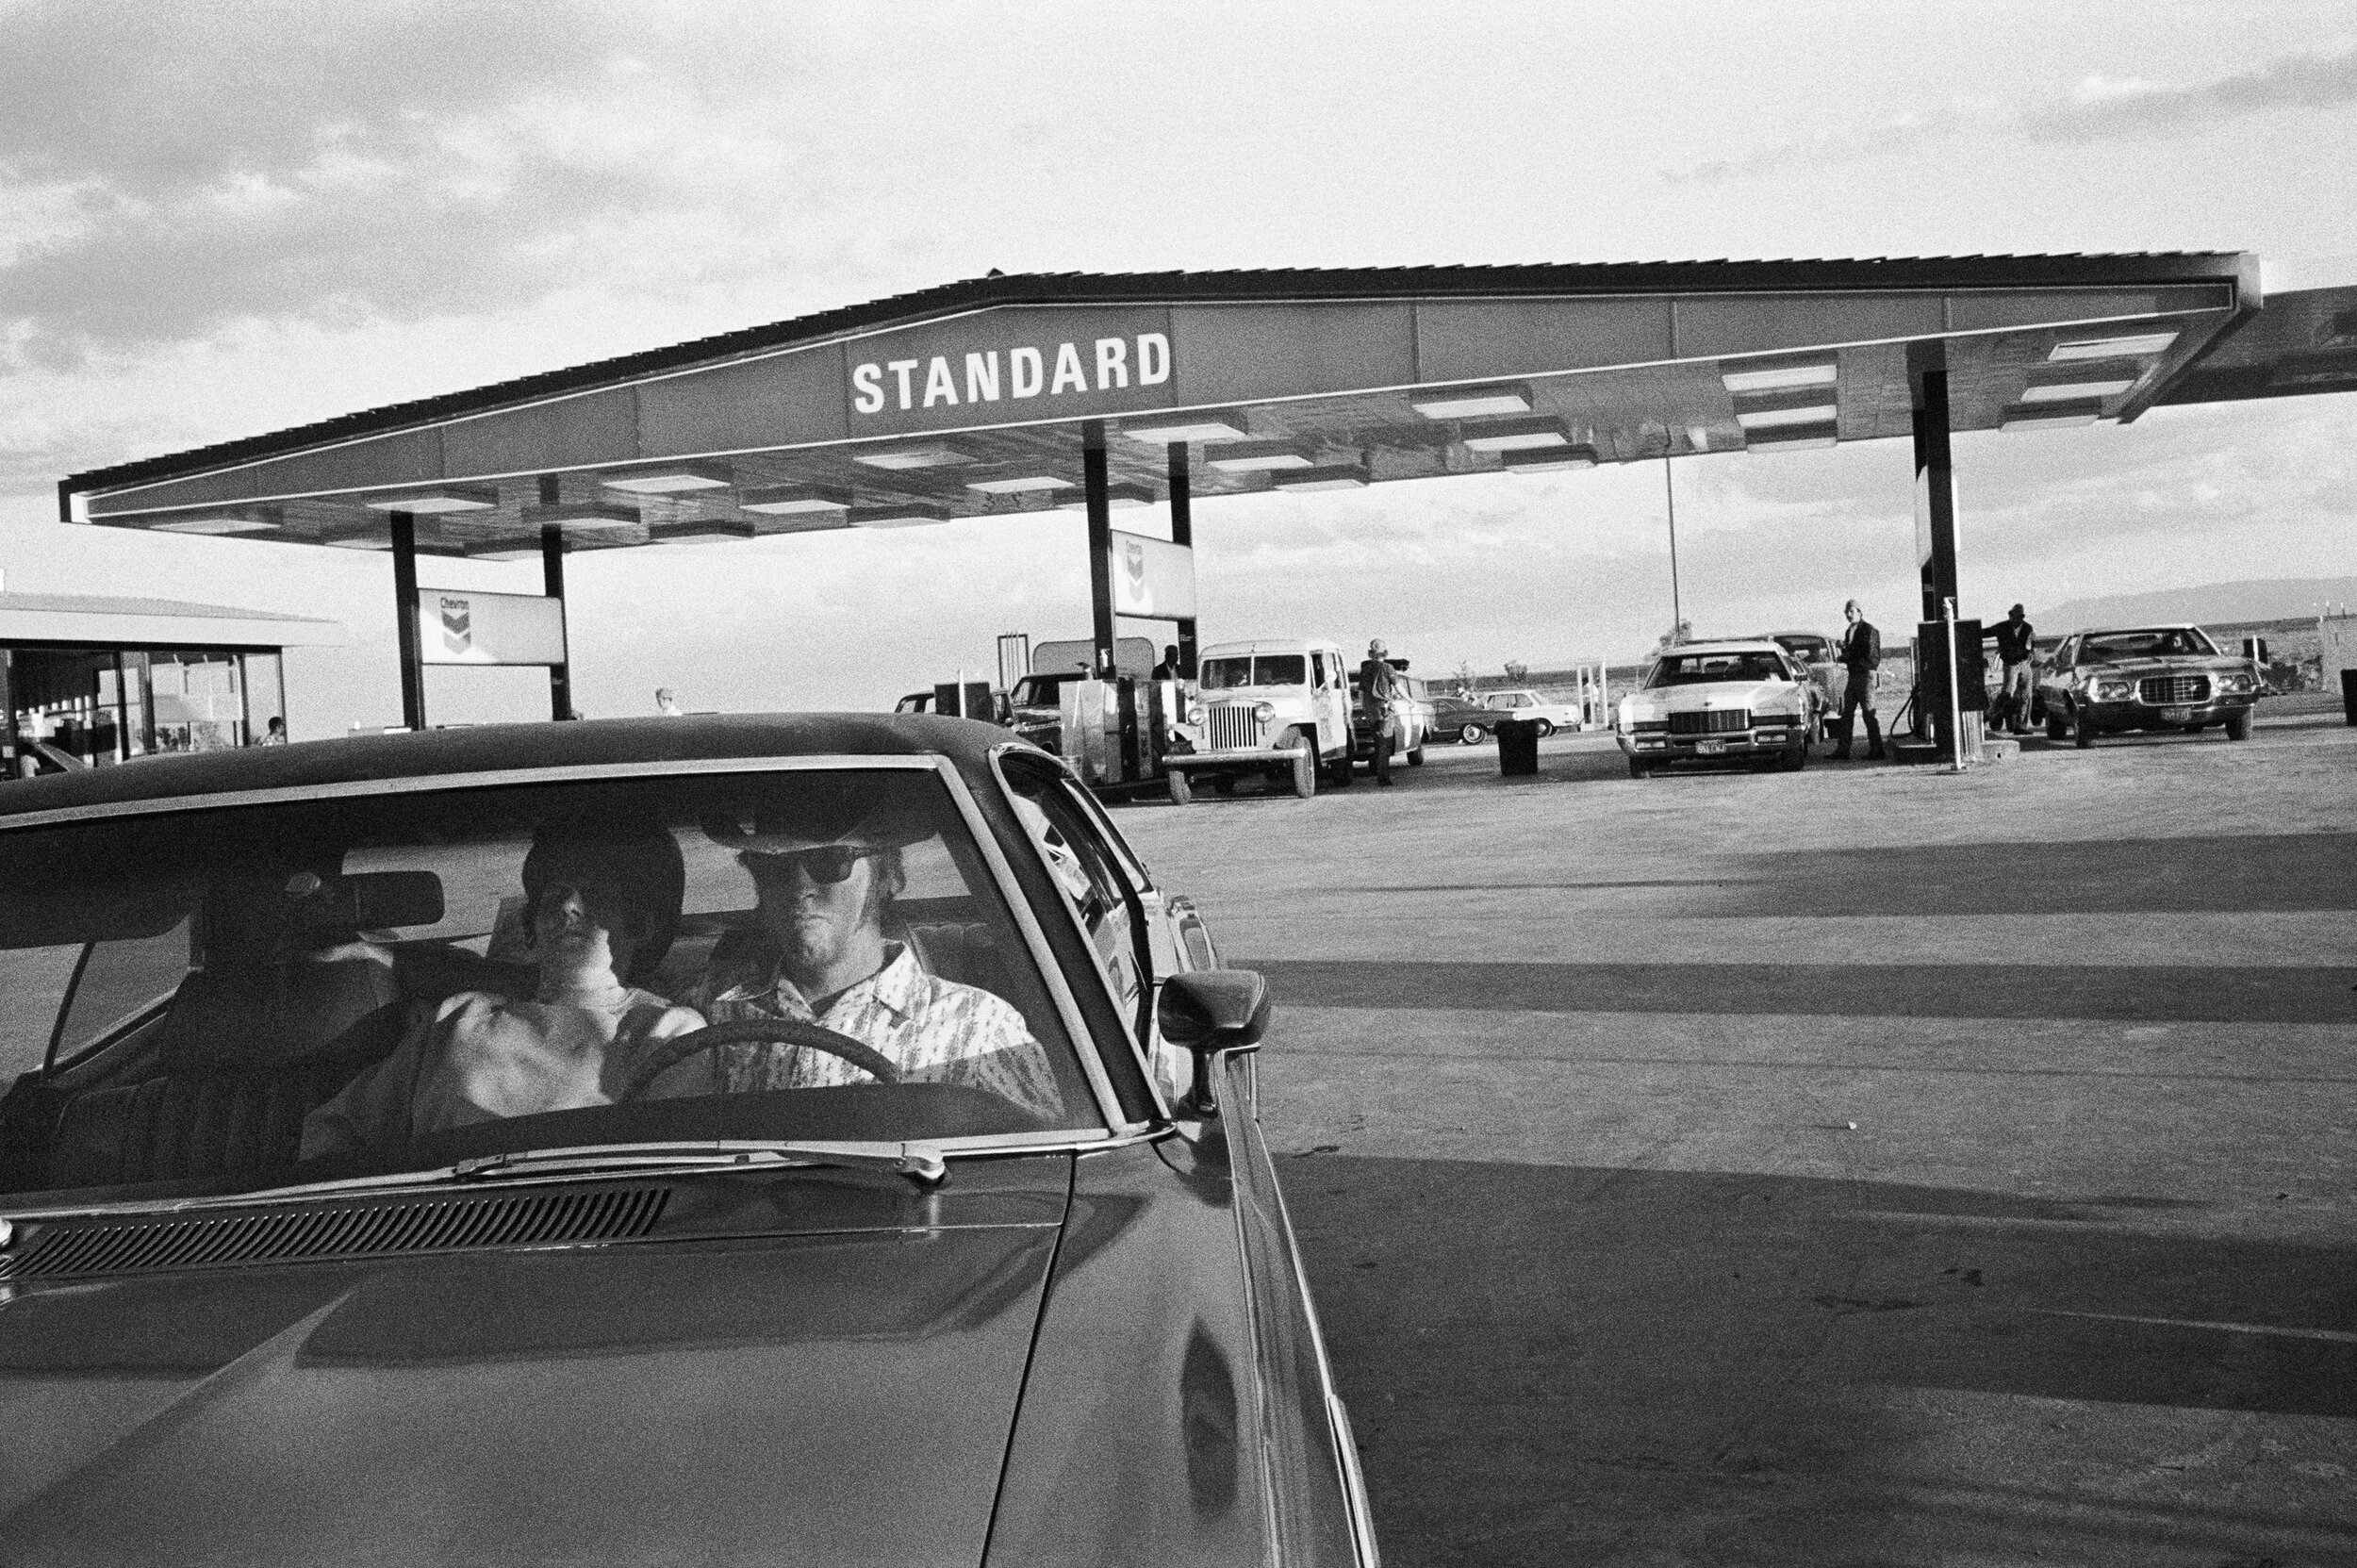 From The White Sky, Couple at the Gas Station, 1972.